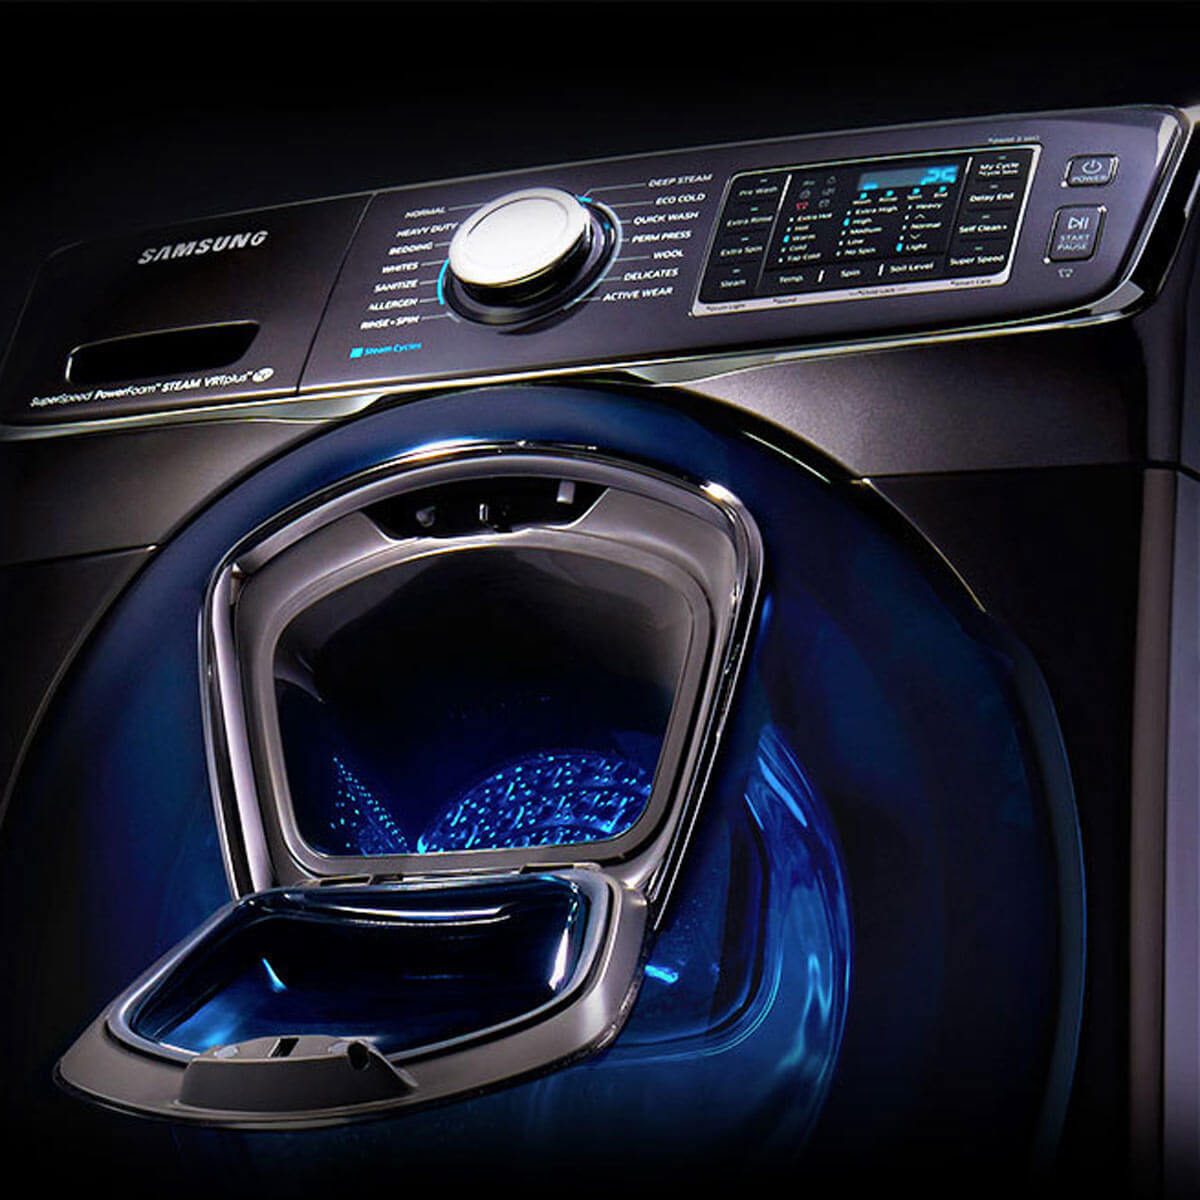 How to Buy a Washer and Dryer